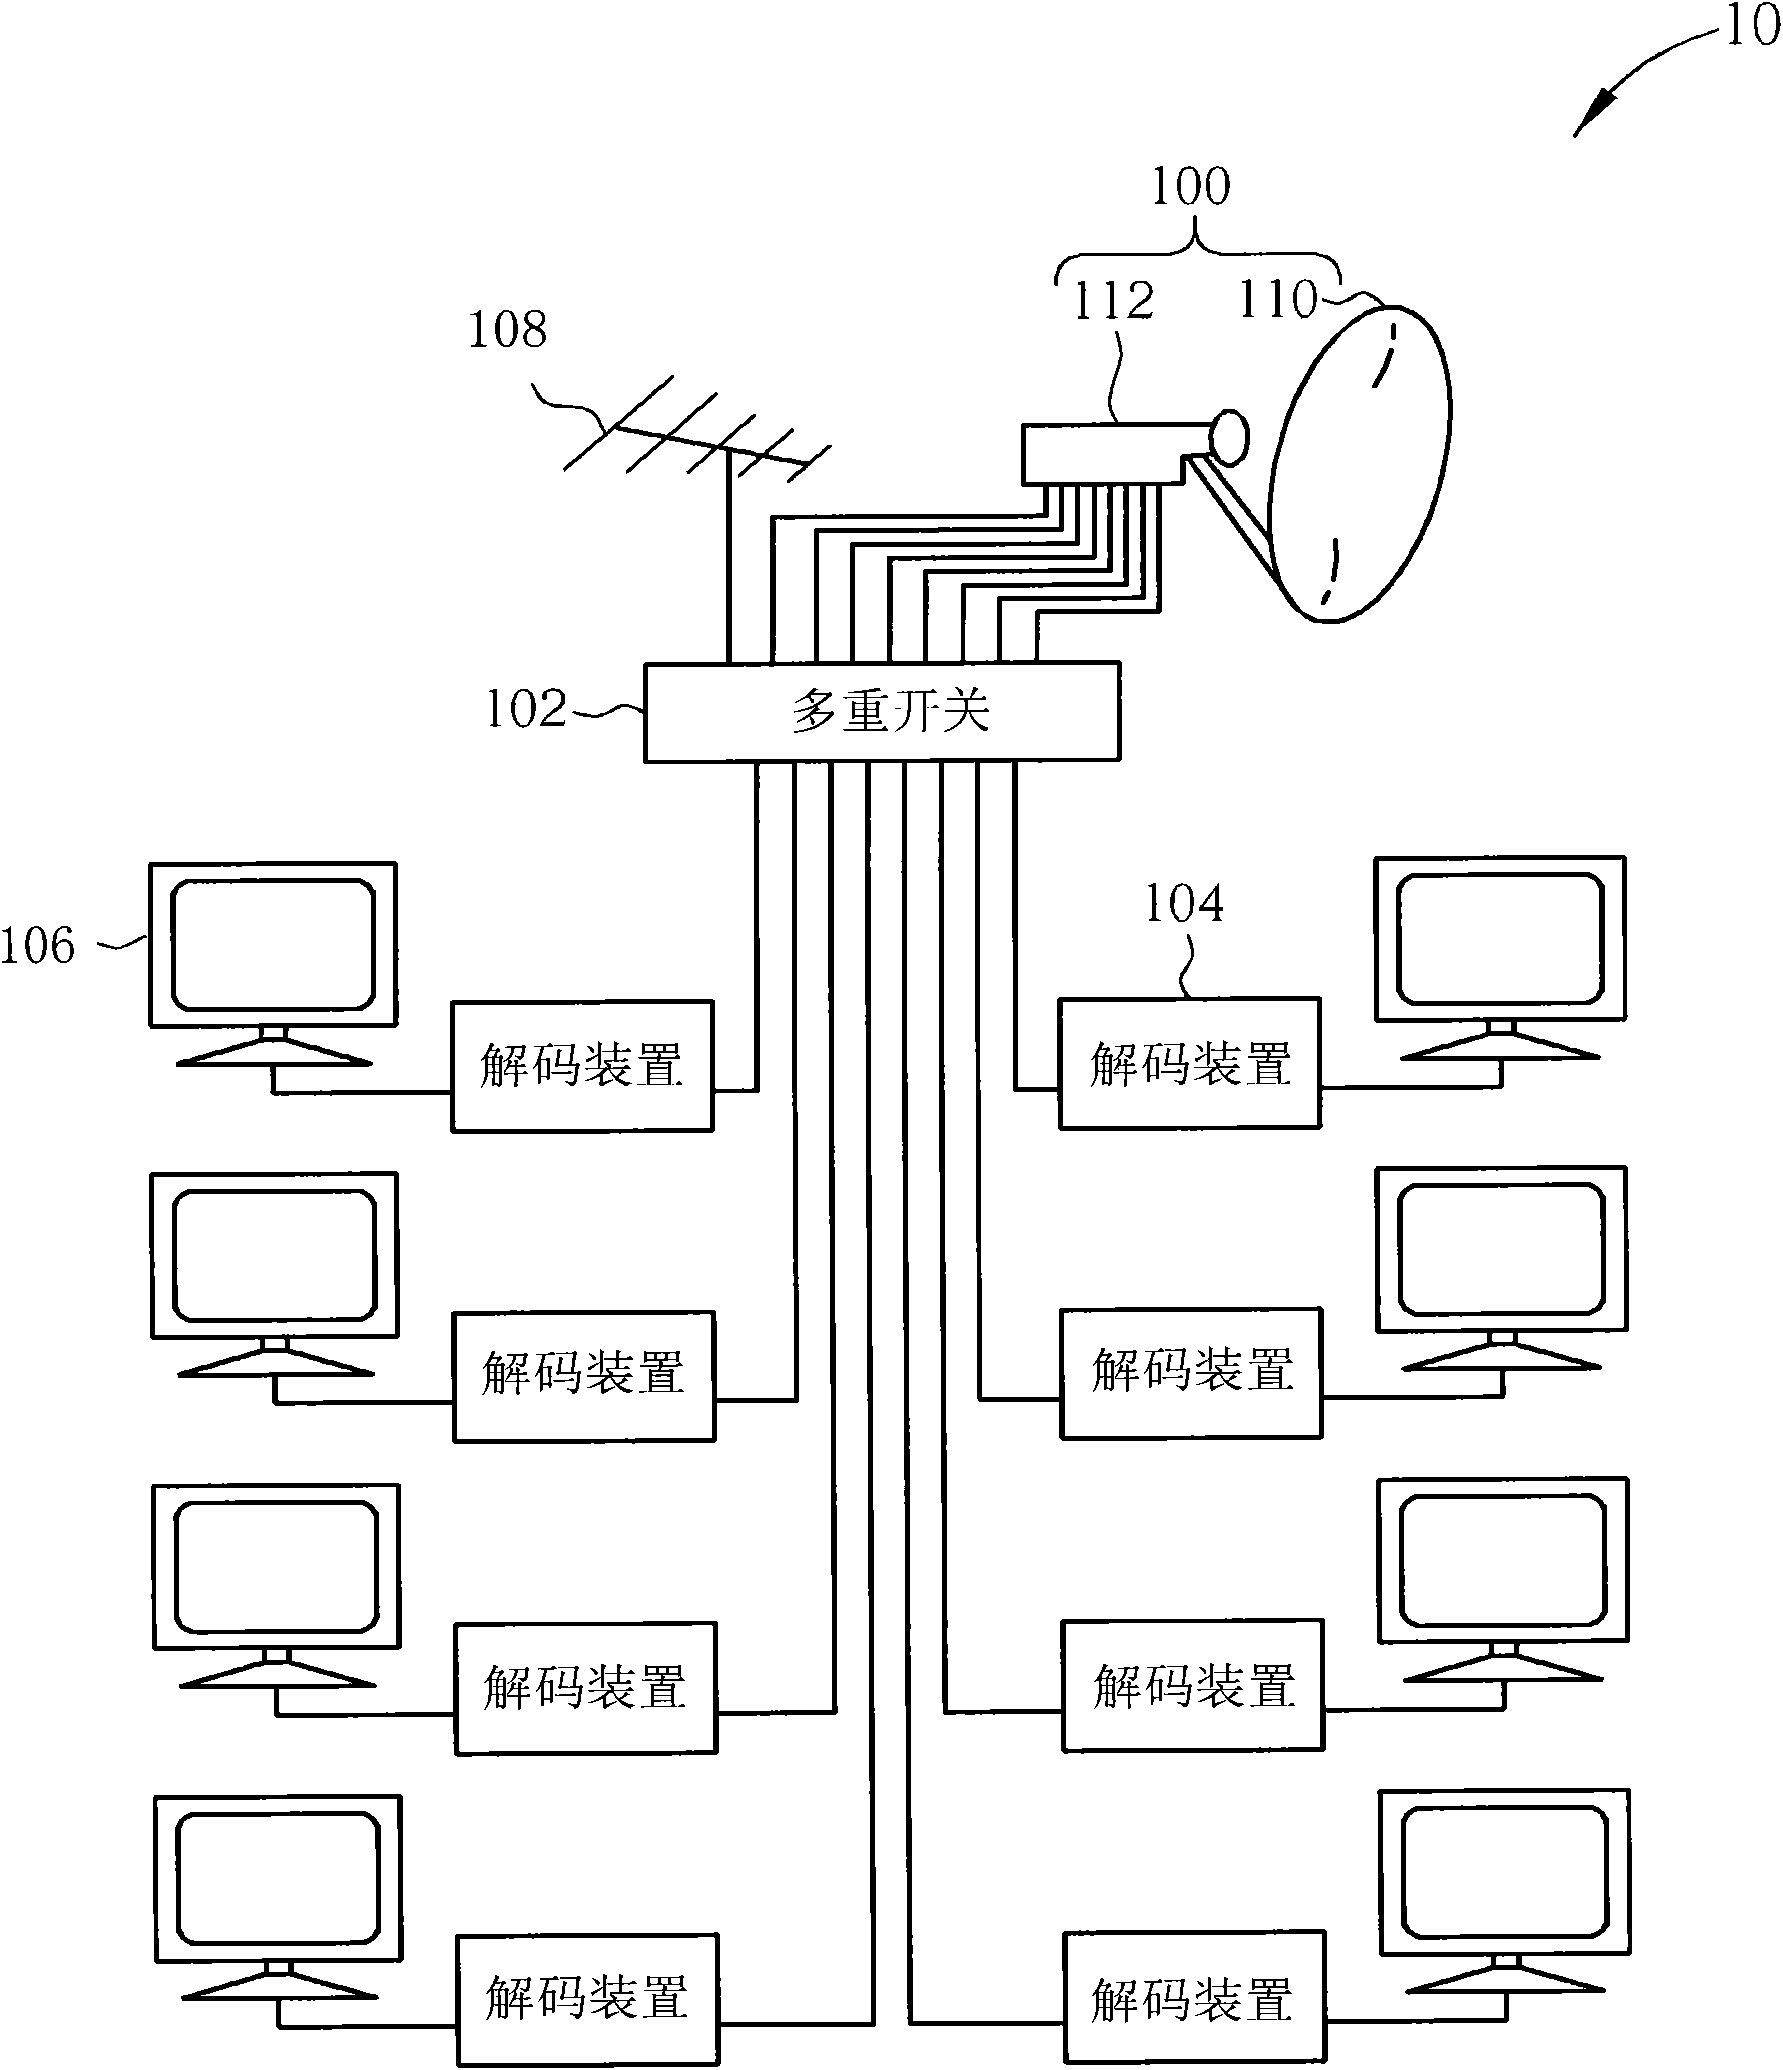 Optical low-noise block downconverter, multi-dwelling unit equipment and related satellite television system